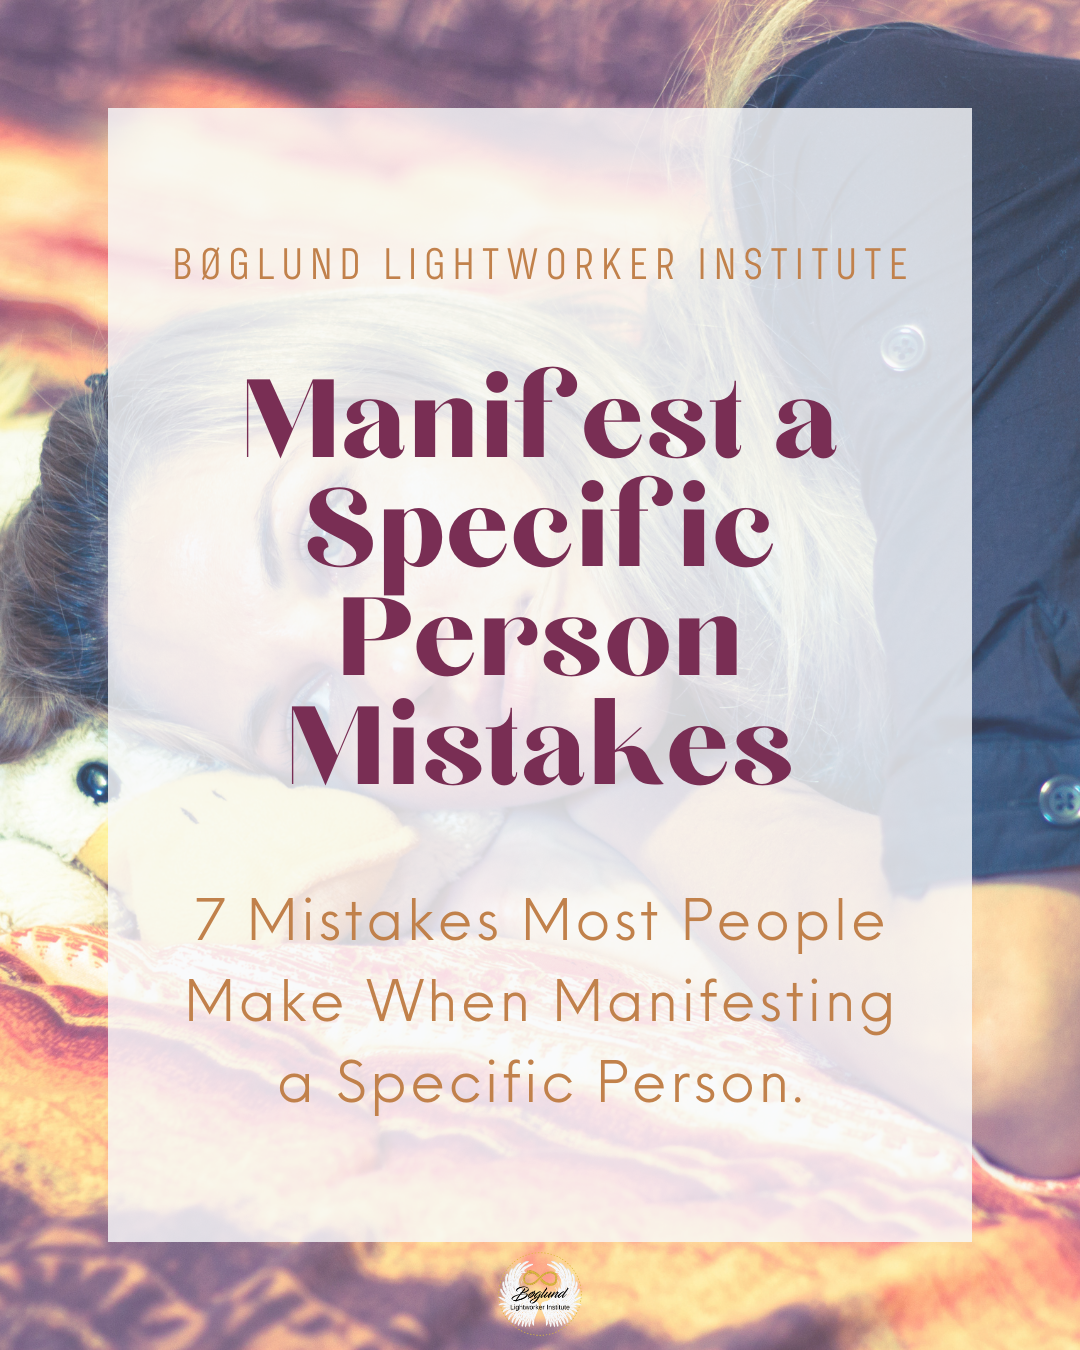 7 Mistakes Most People Make When Manifesting a Specific Person.